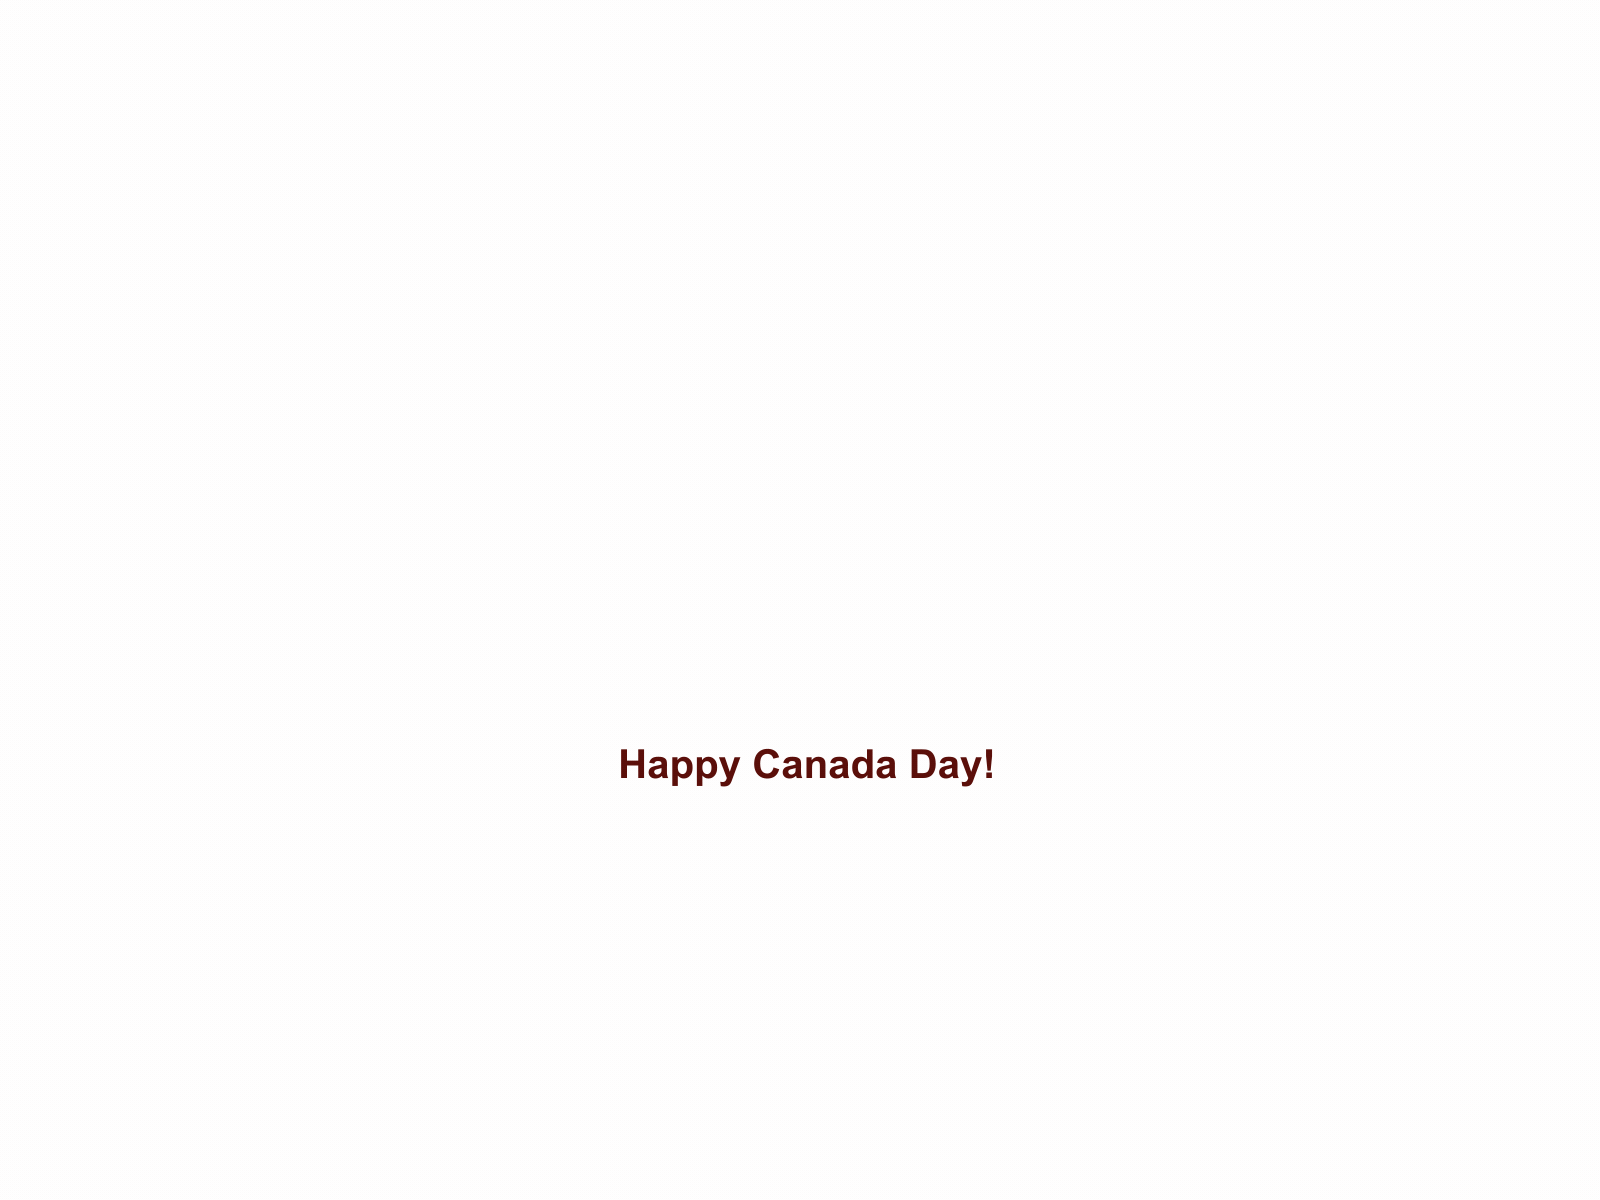 Happy Canada Day after effects canada mapleleaf simple